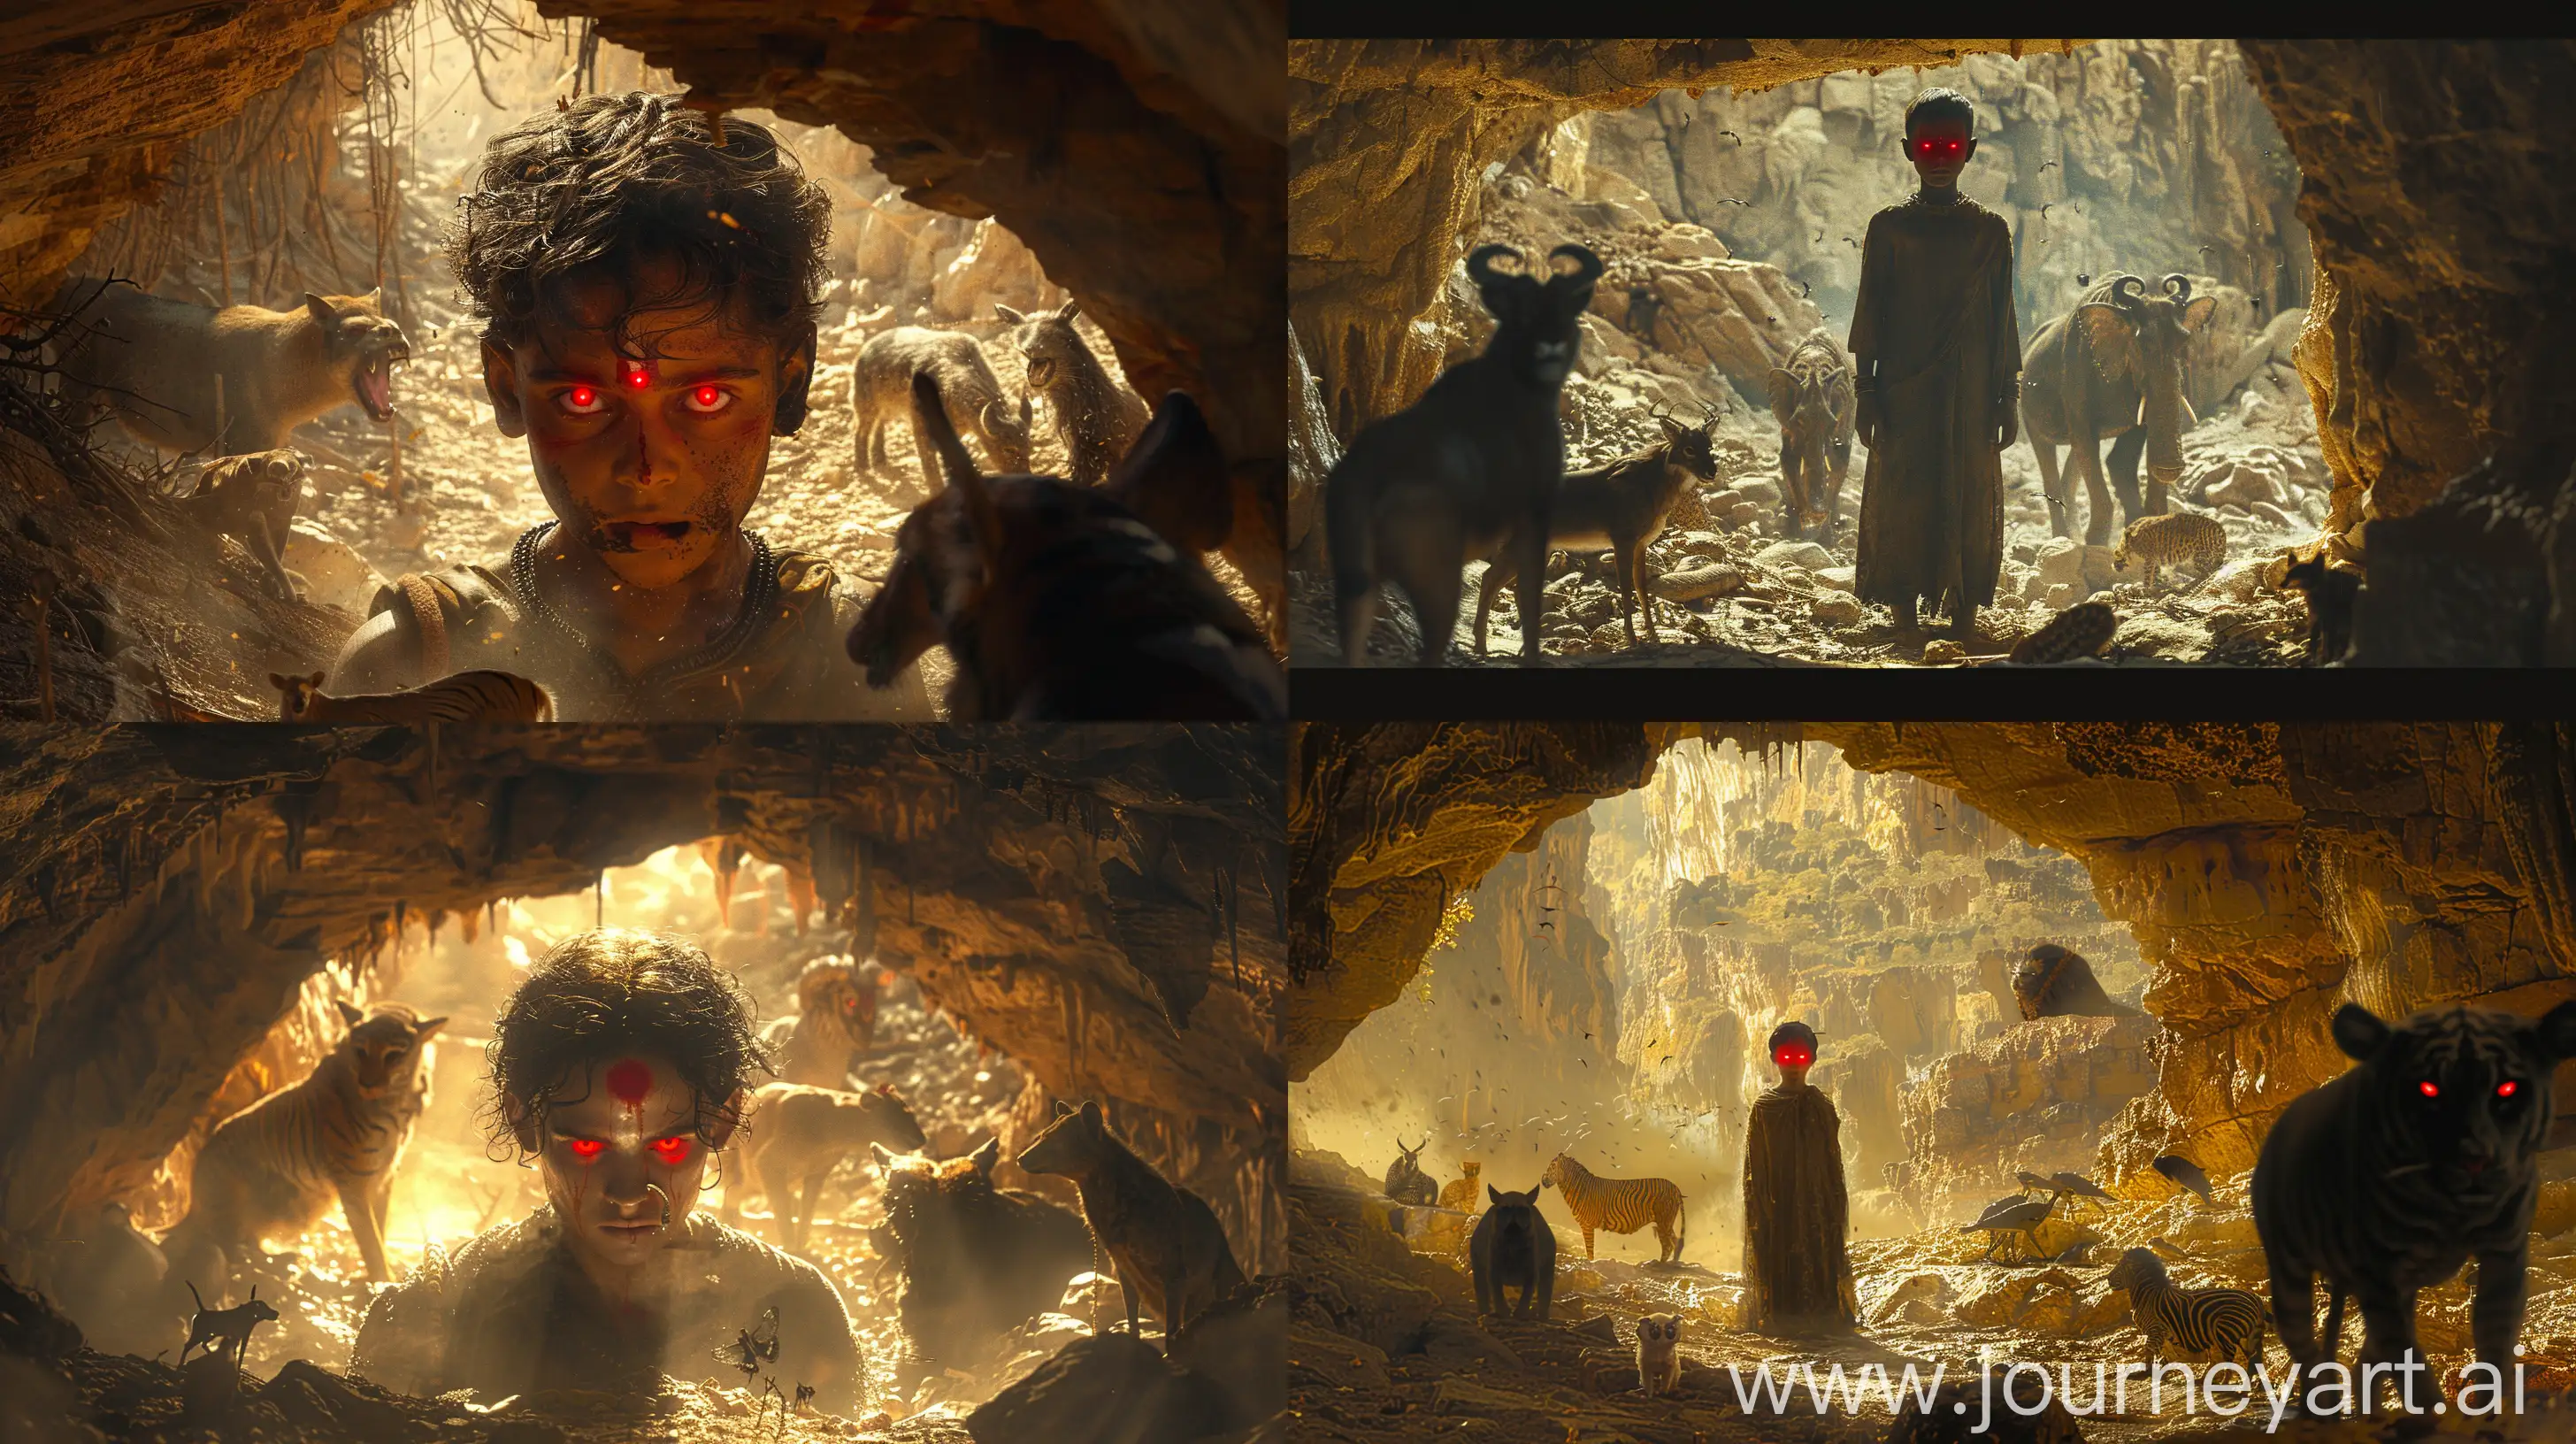 Ancient-Indian-Antagonist-in-Gloomridden-Cave-with-Wildlife